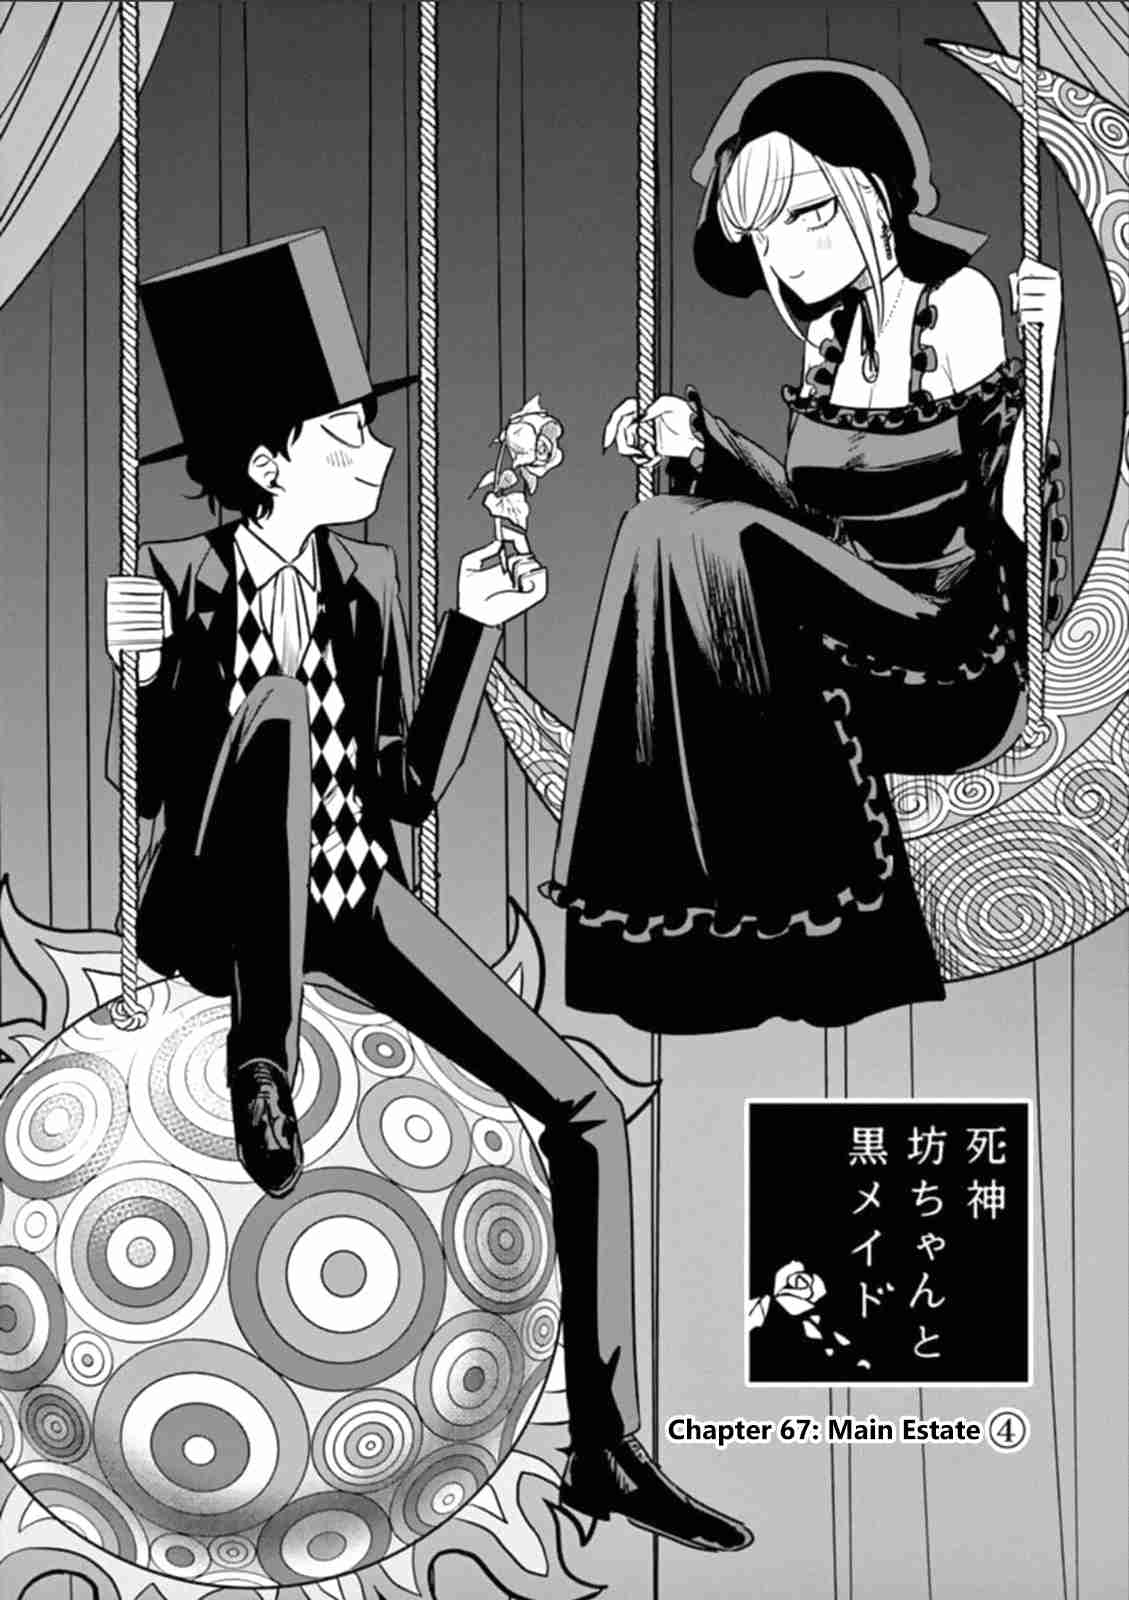 The Duke of Death and His Black Maid Ch. 67 Main Estate (4)